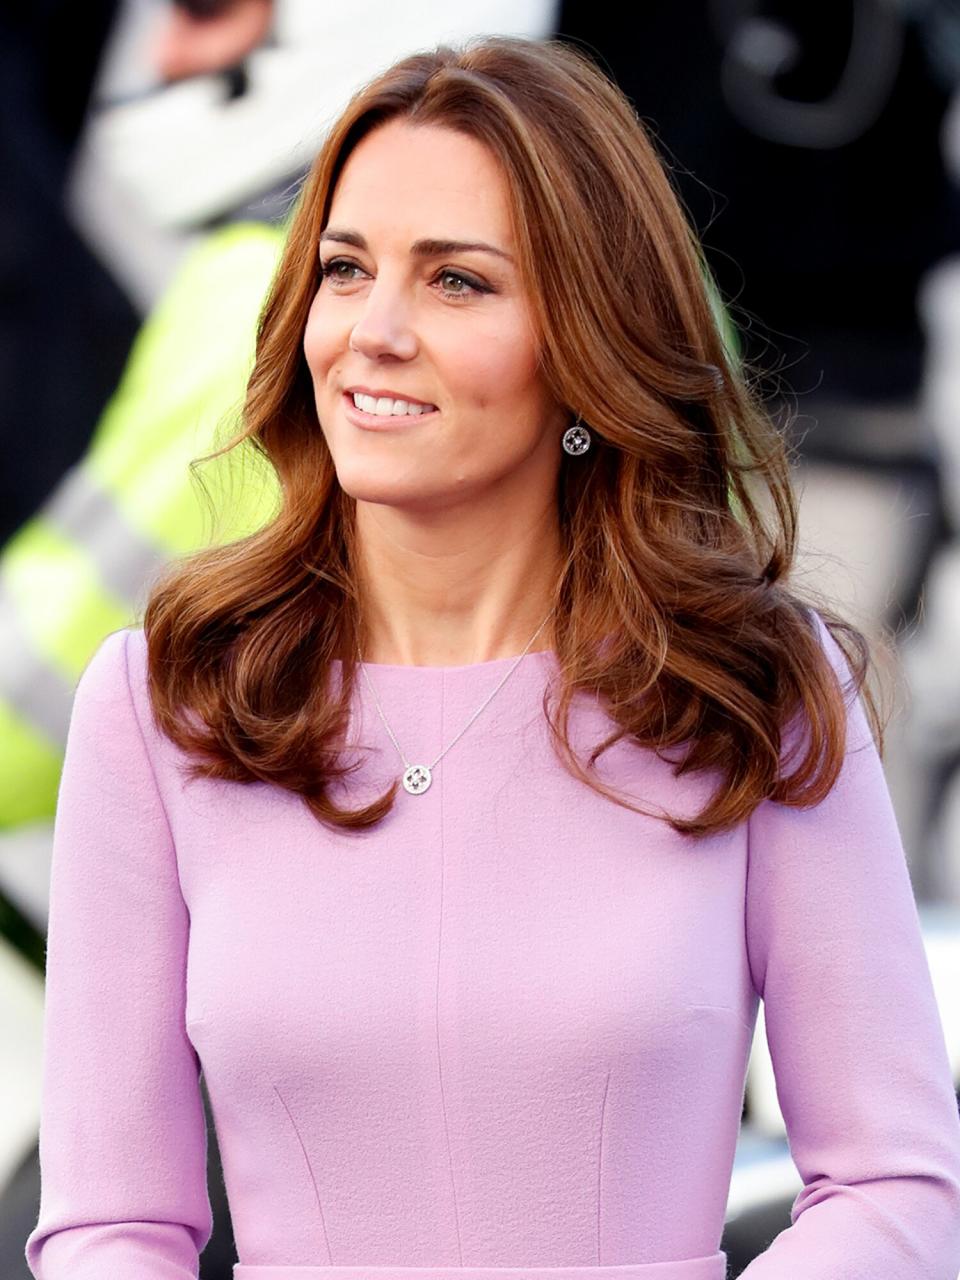 Catherine, Duchess of Cambridge attends the Global Ministerial Mental Health Summit at London County Hall on October 9, 2018 in London, England